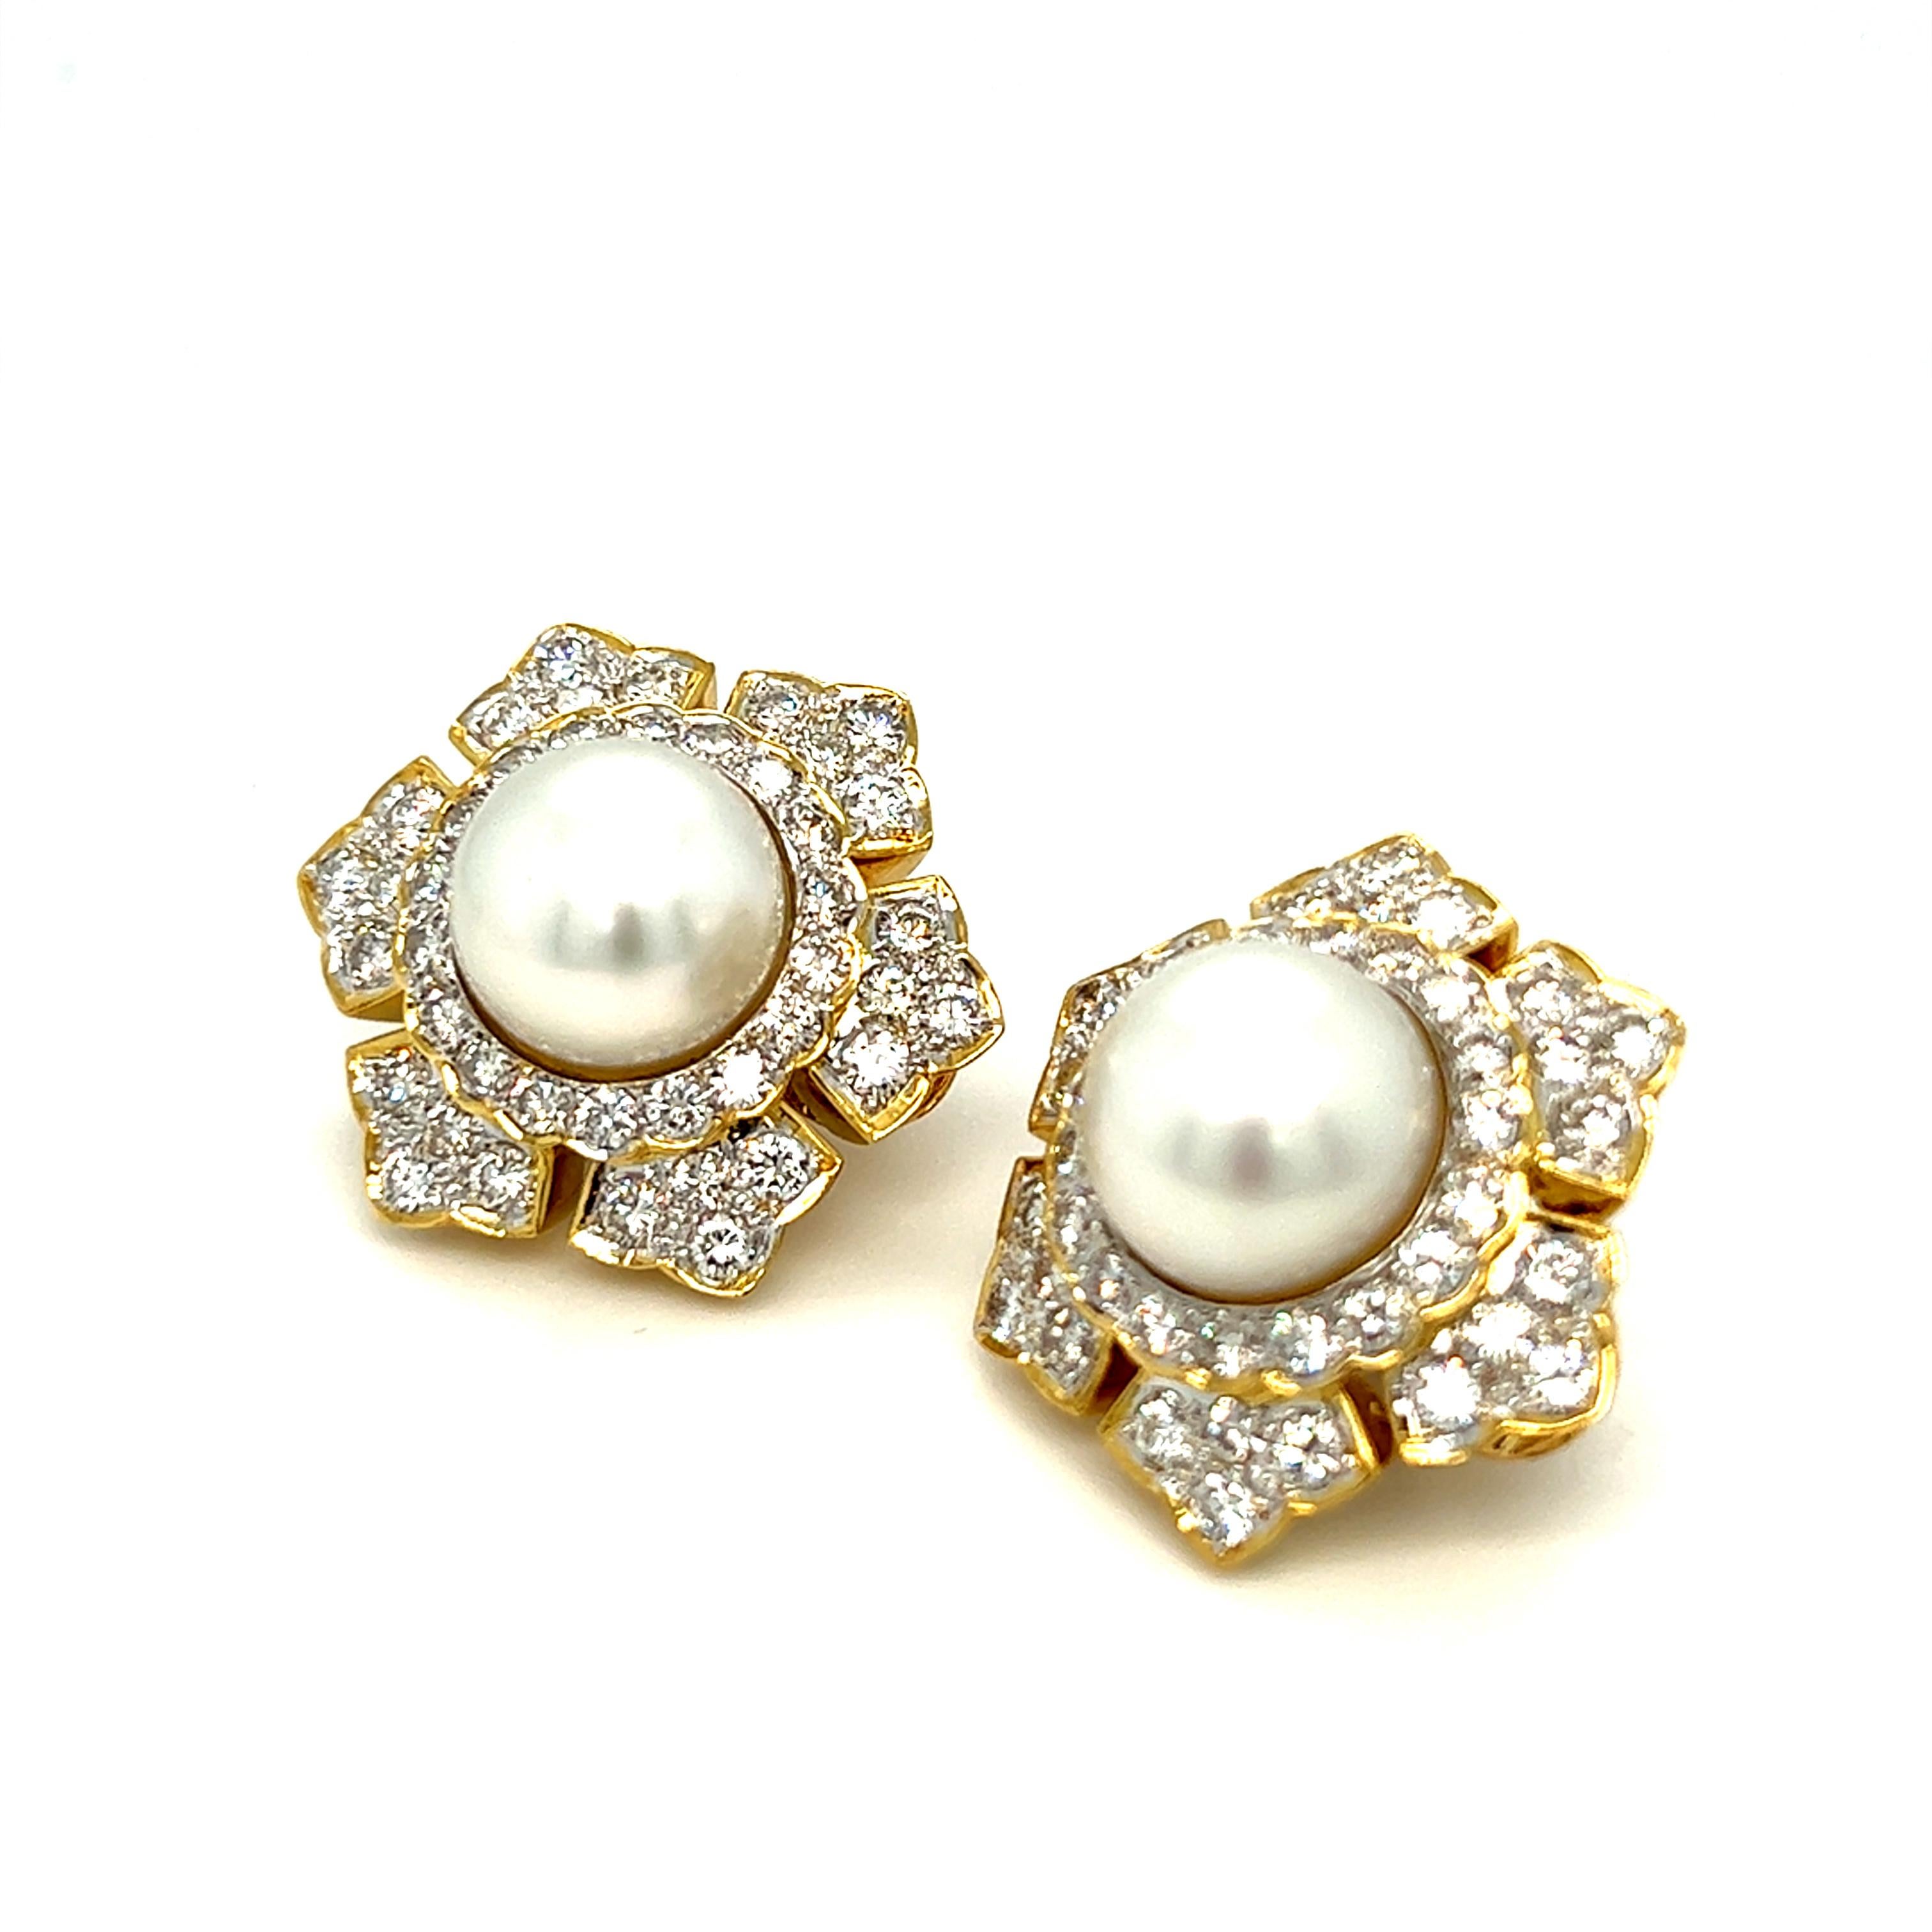 Estate Set of Pearl and Diamond Ring and Earrings Starburst 18k Yellow Gold For Sale 5